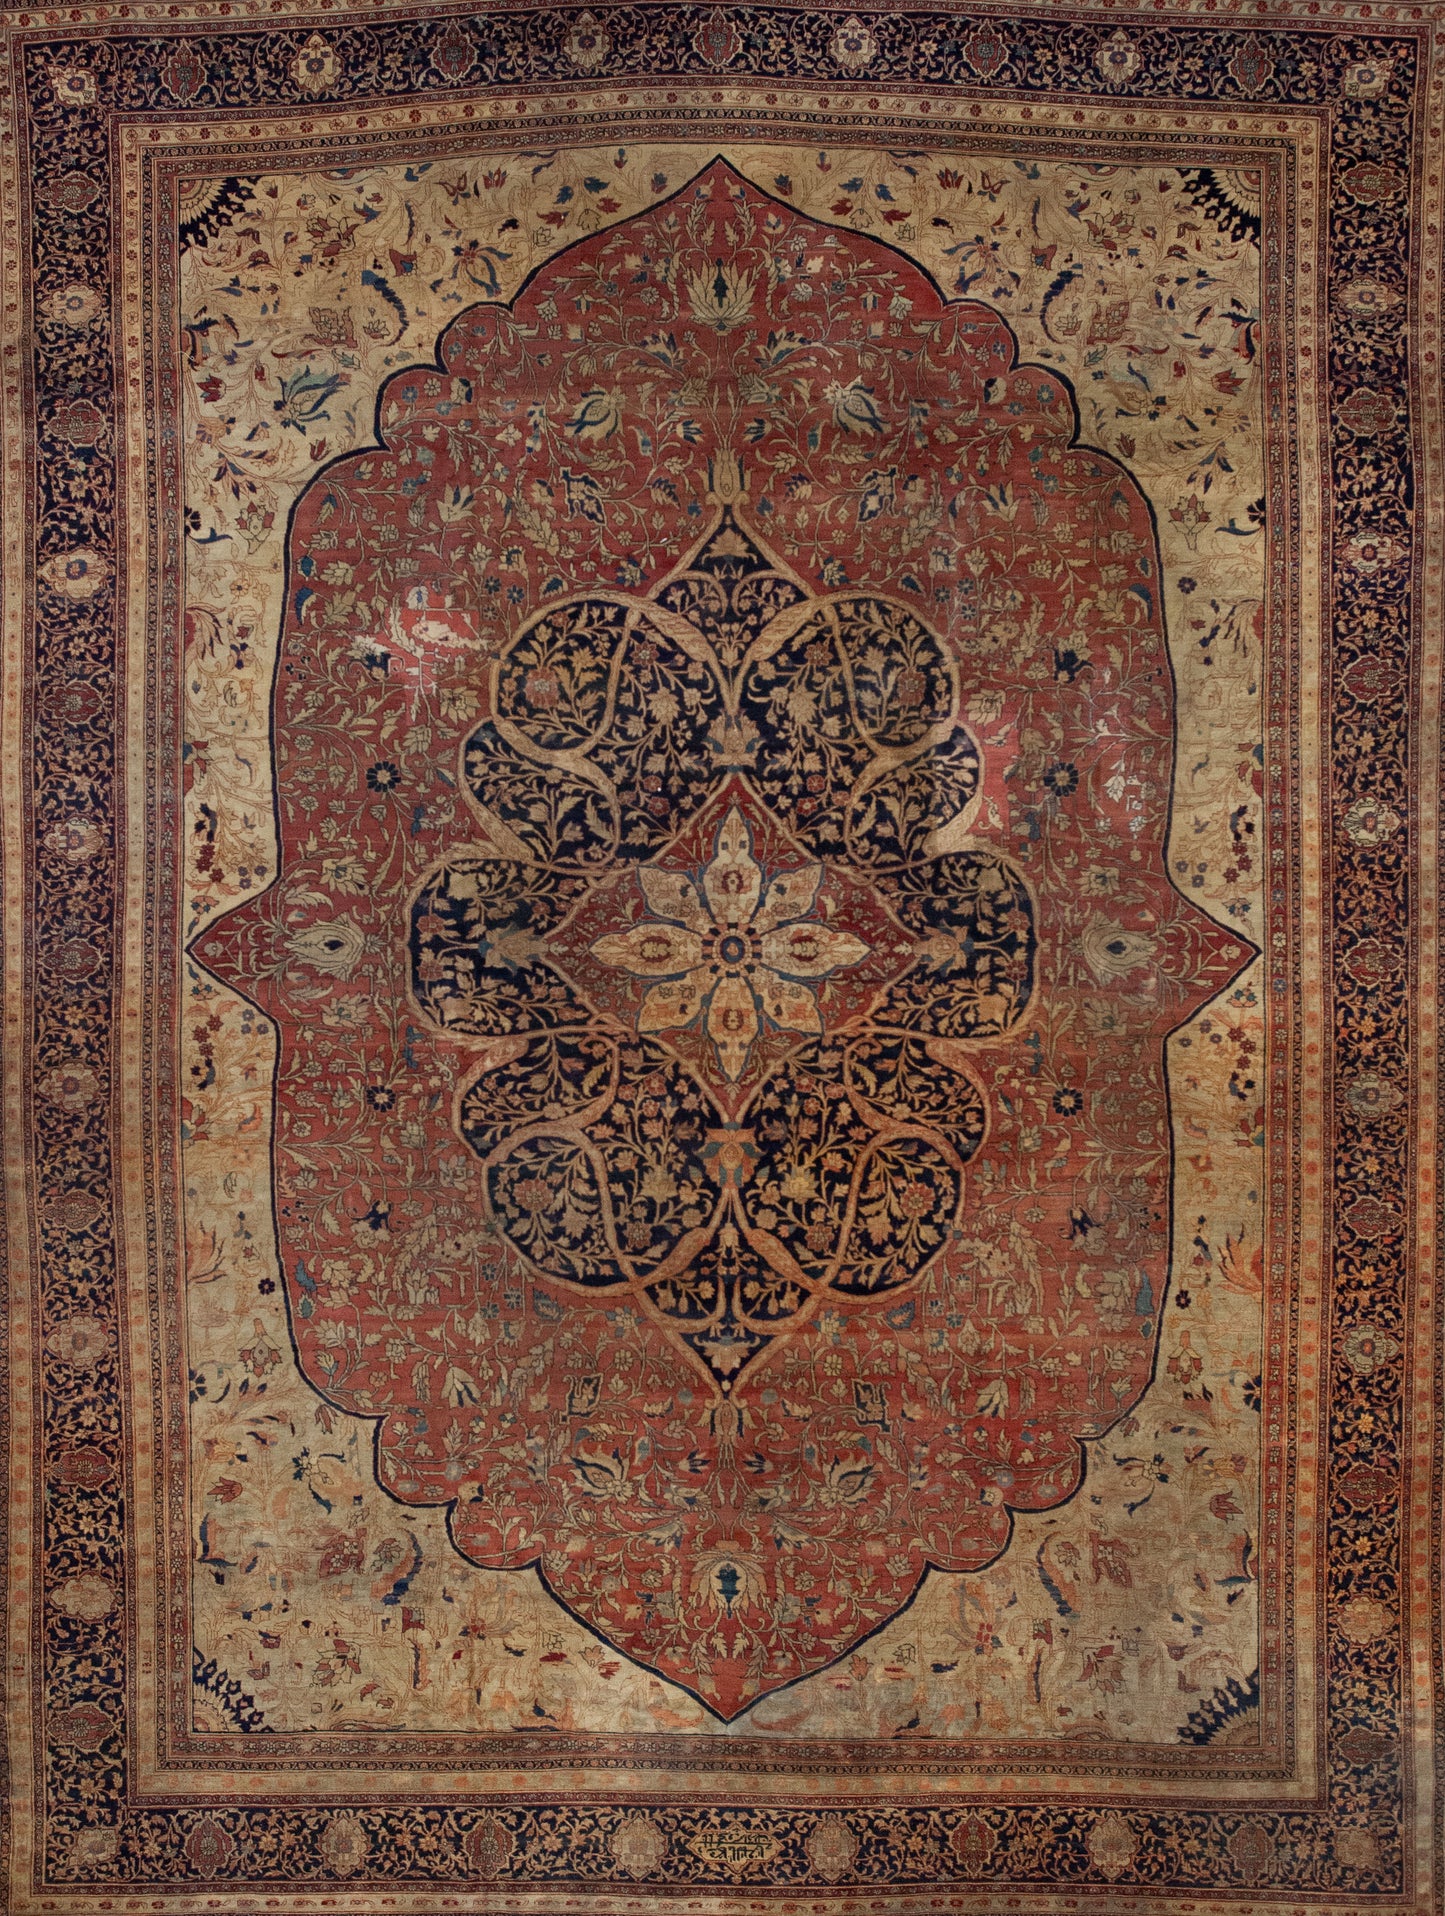 This antiquity rug is rich in small details with a bright color palette with yellow, blue, and brown.